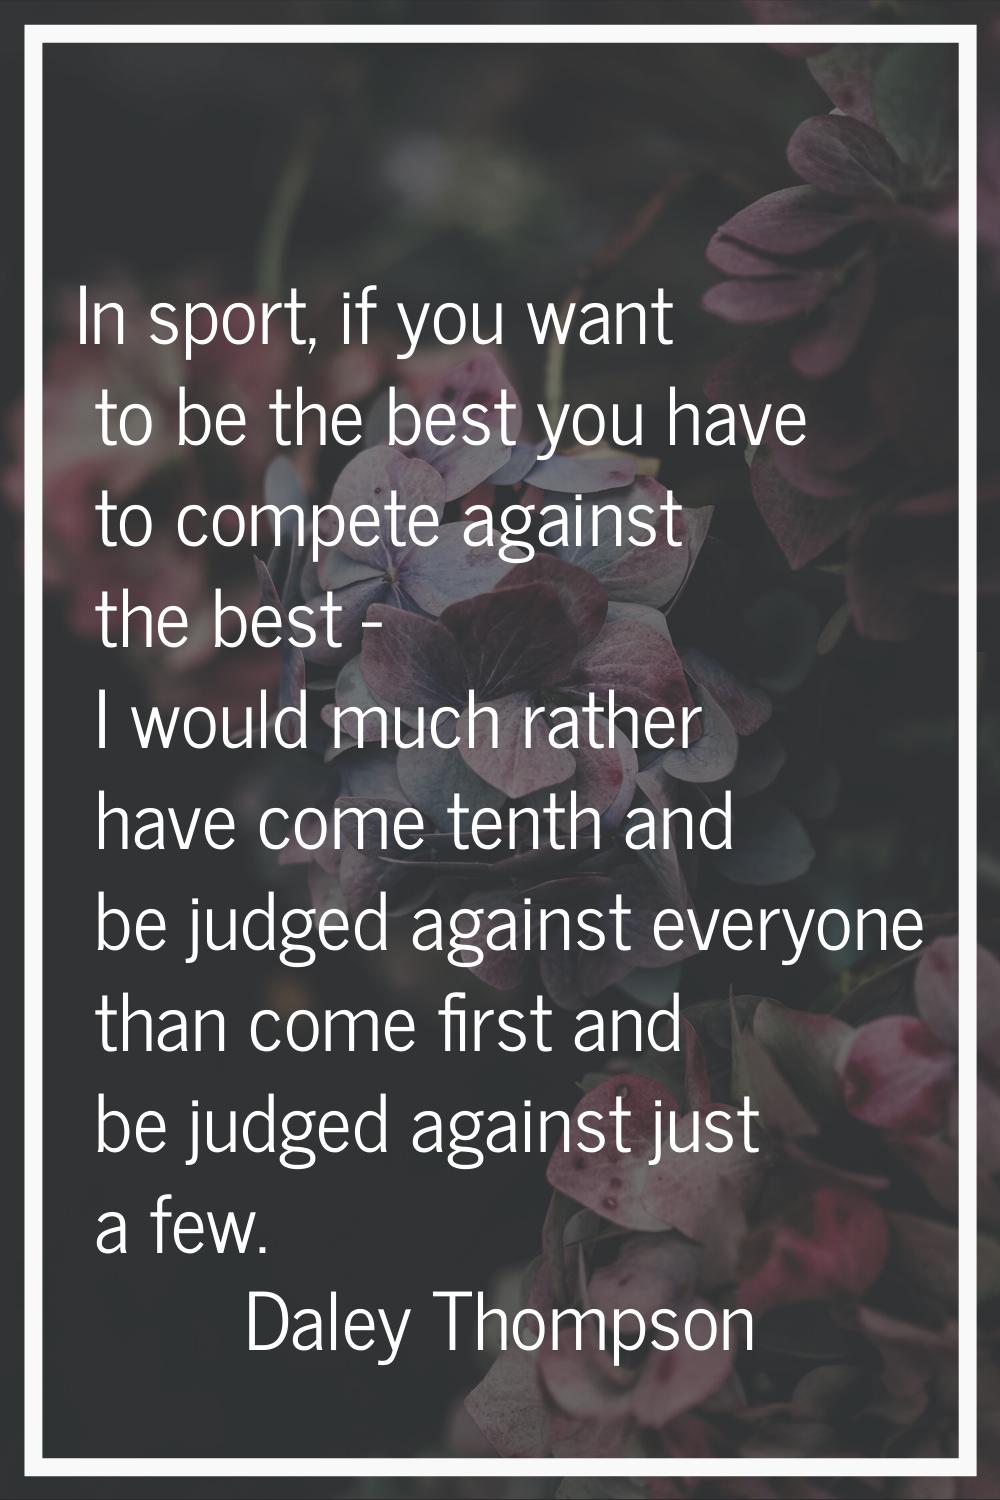 In sport, if you want to be the best you have to compete against the best - I would much rather hav